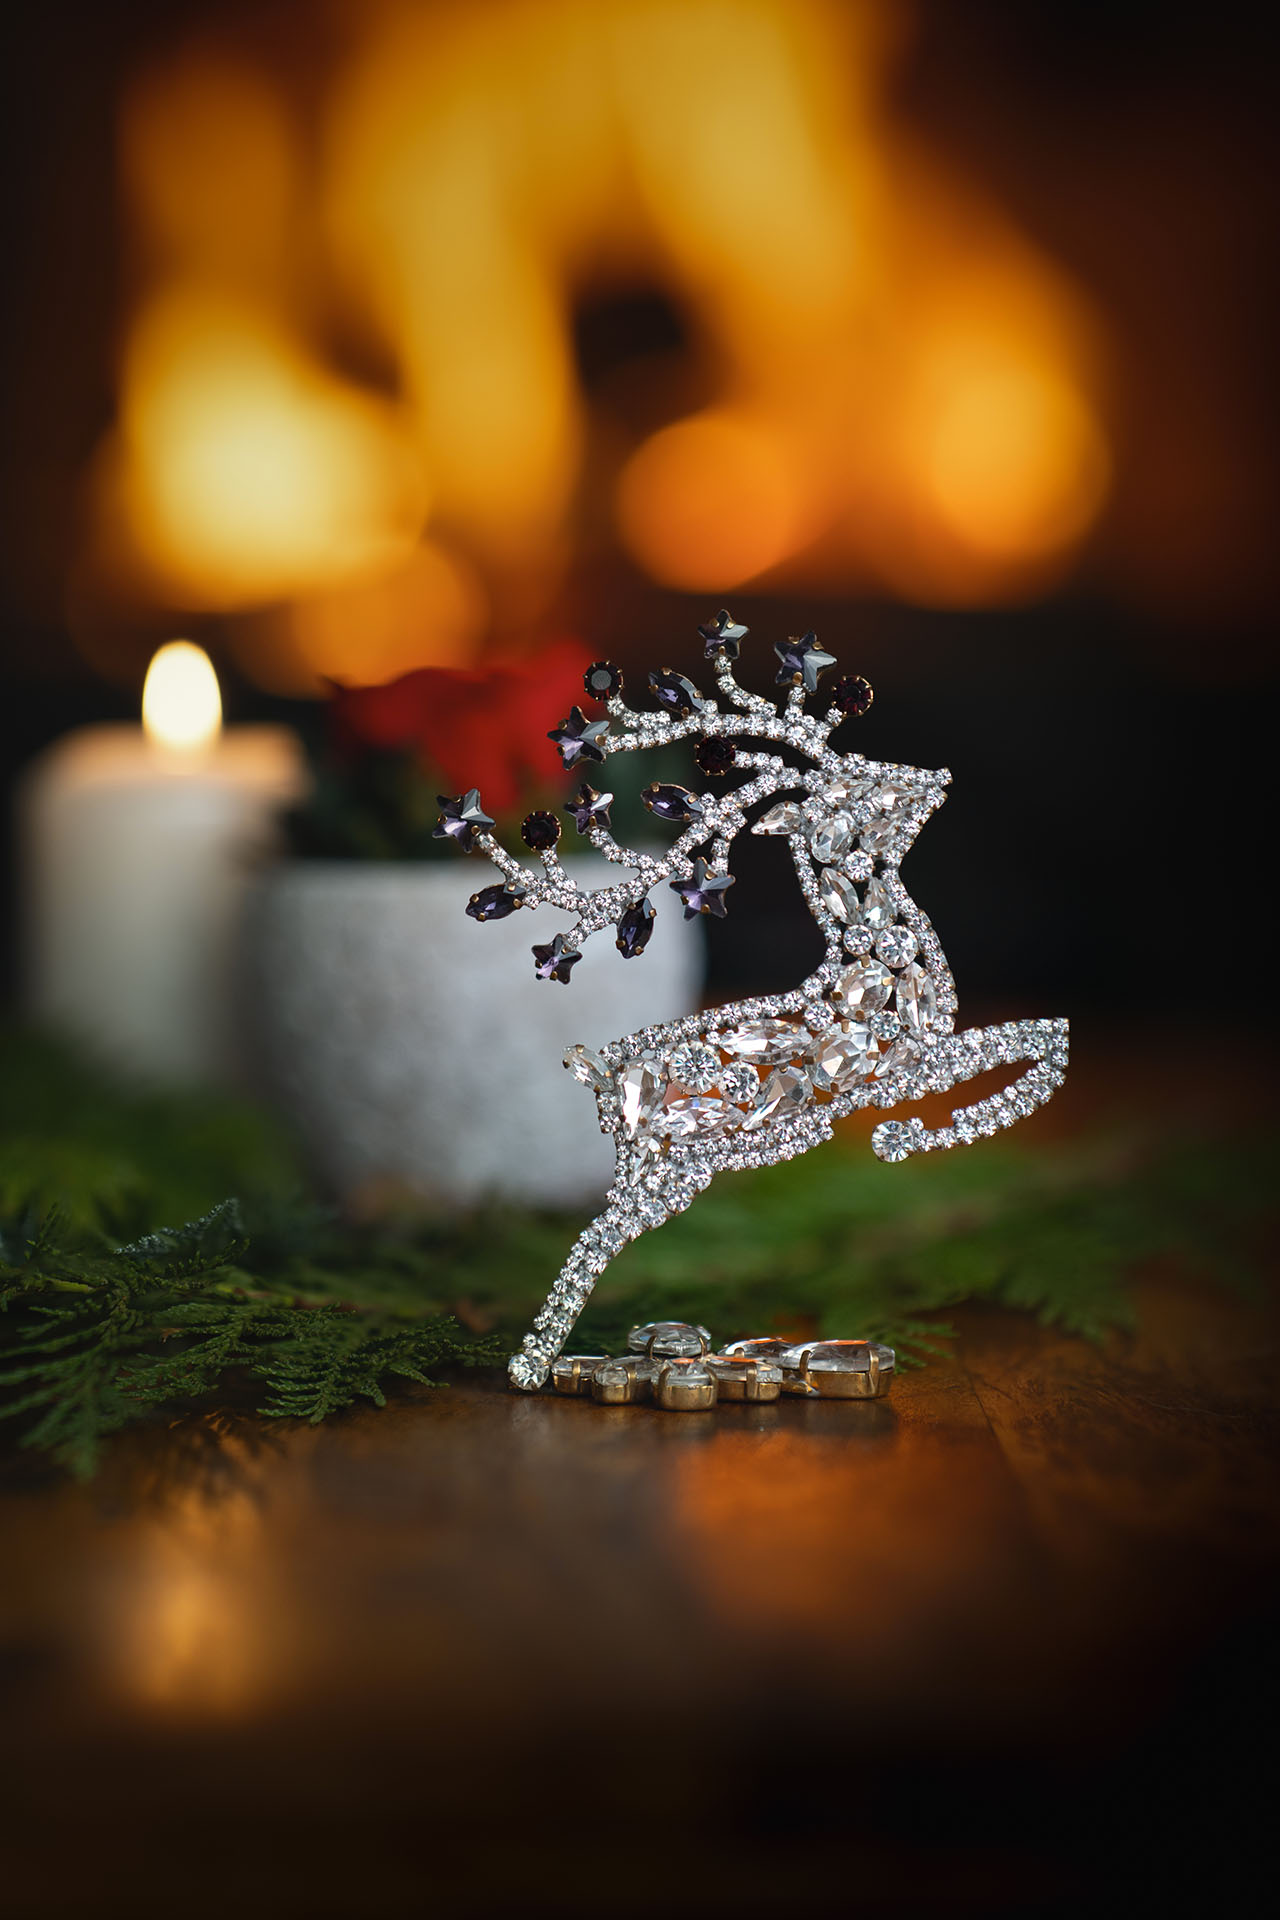 Decorative reindeer figurine with clear rhinestones - facing right